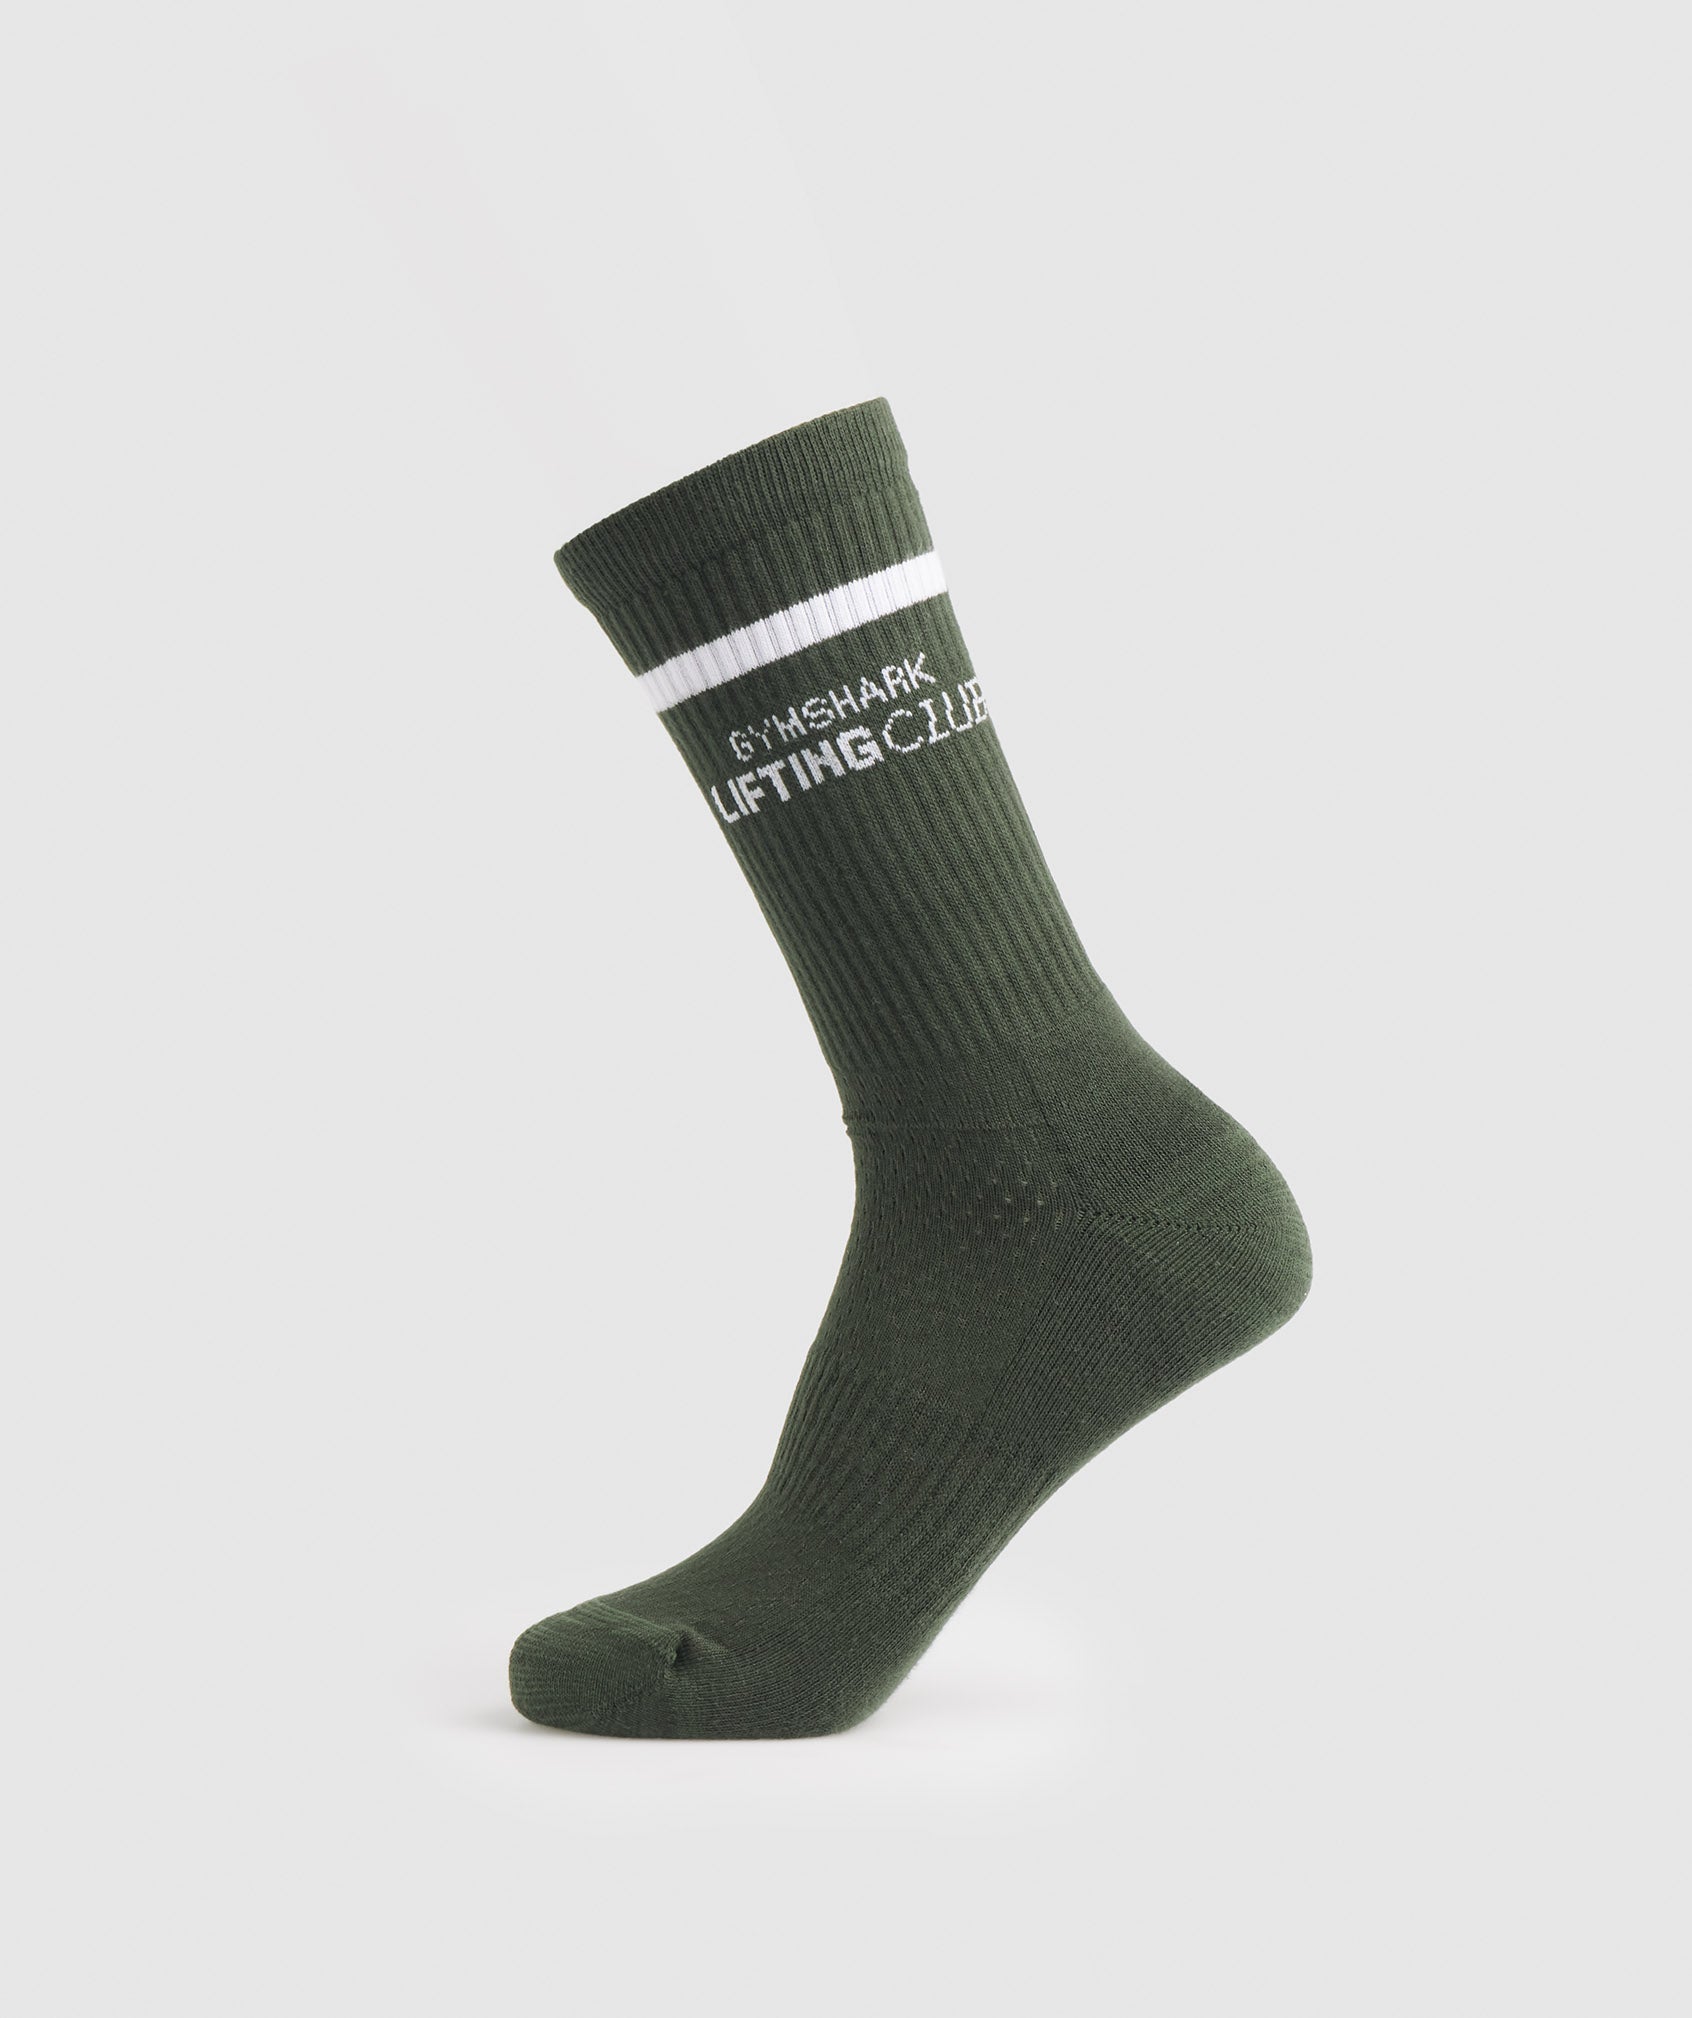 Social Club Double Stripe 1pk Sock in Moss Olive/White - view 1